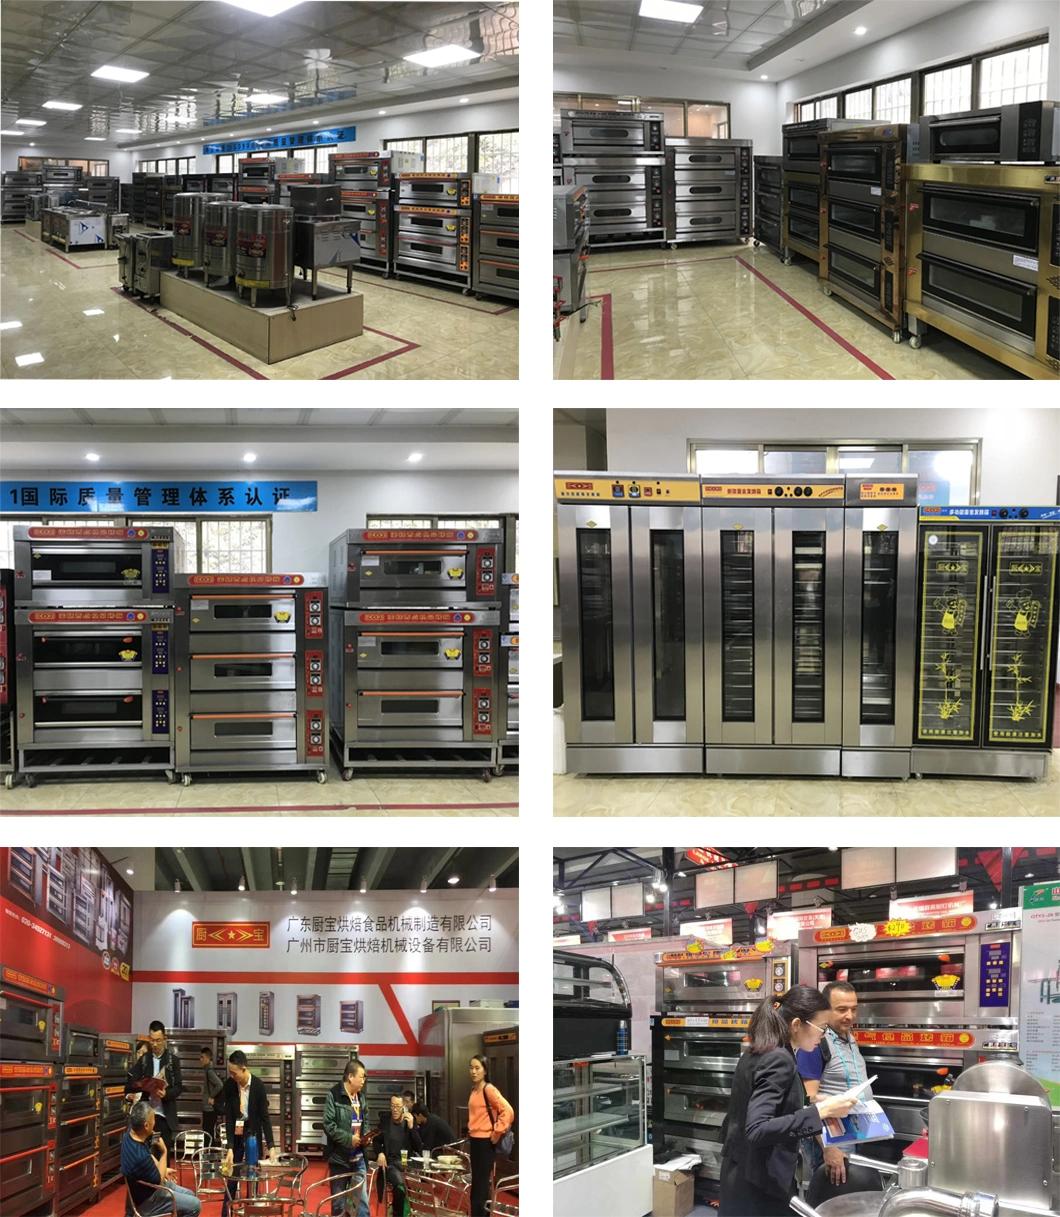 1 Deck 2 Trays Electric Pizza Oven for Commercial Kitchen Baking Equipment Food Machinery Bakery Machine